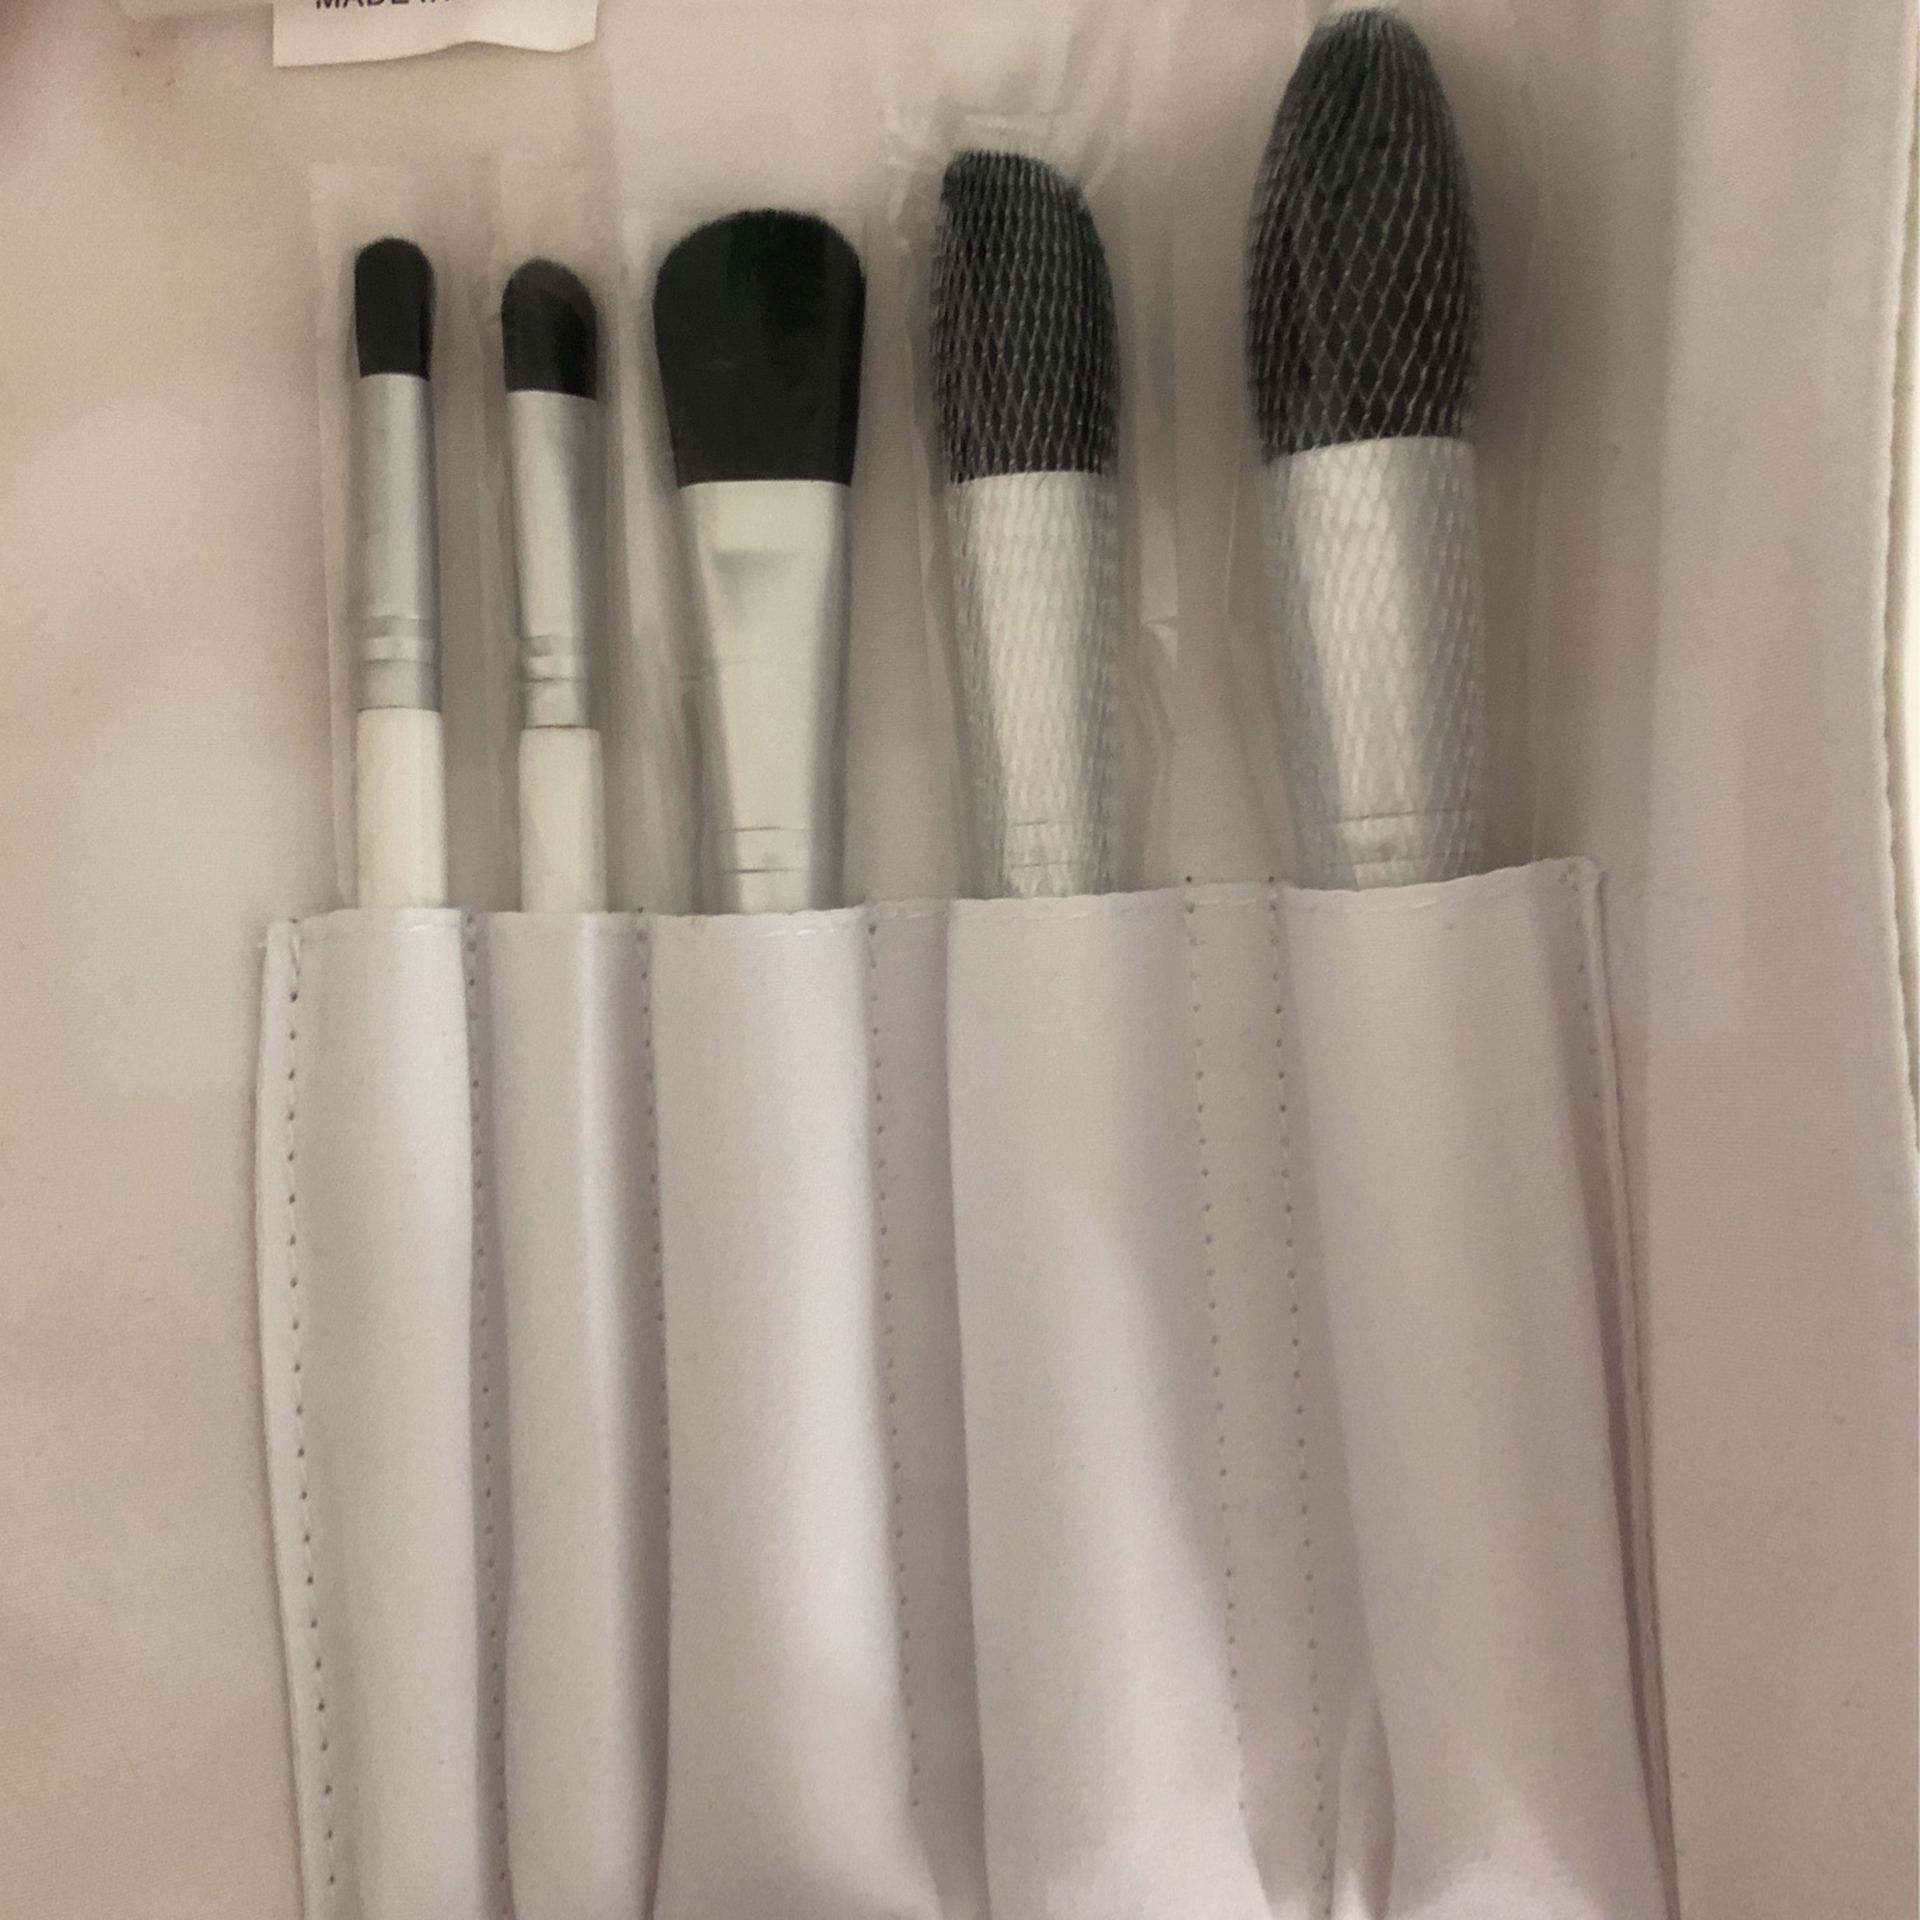 Neiman marcus makeup brush with case